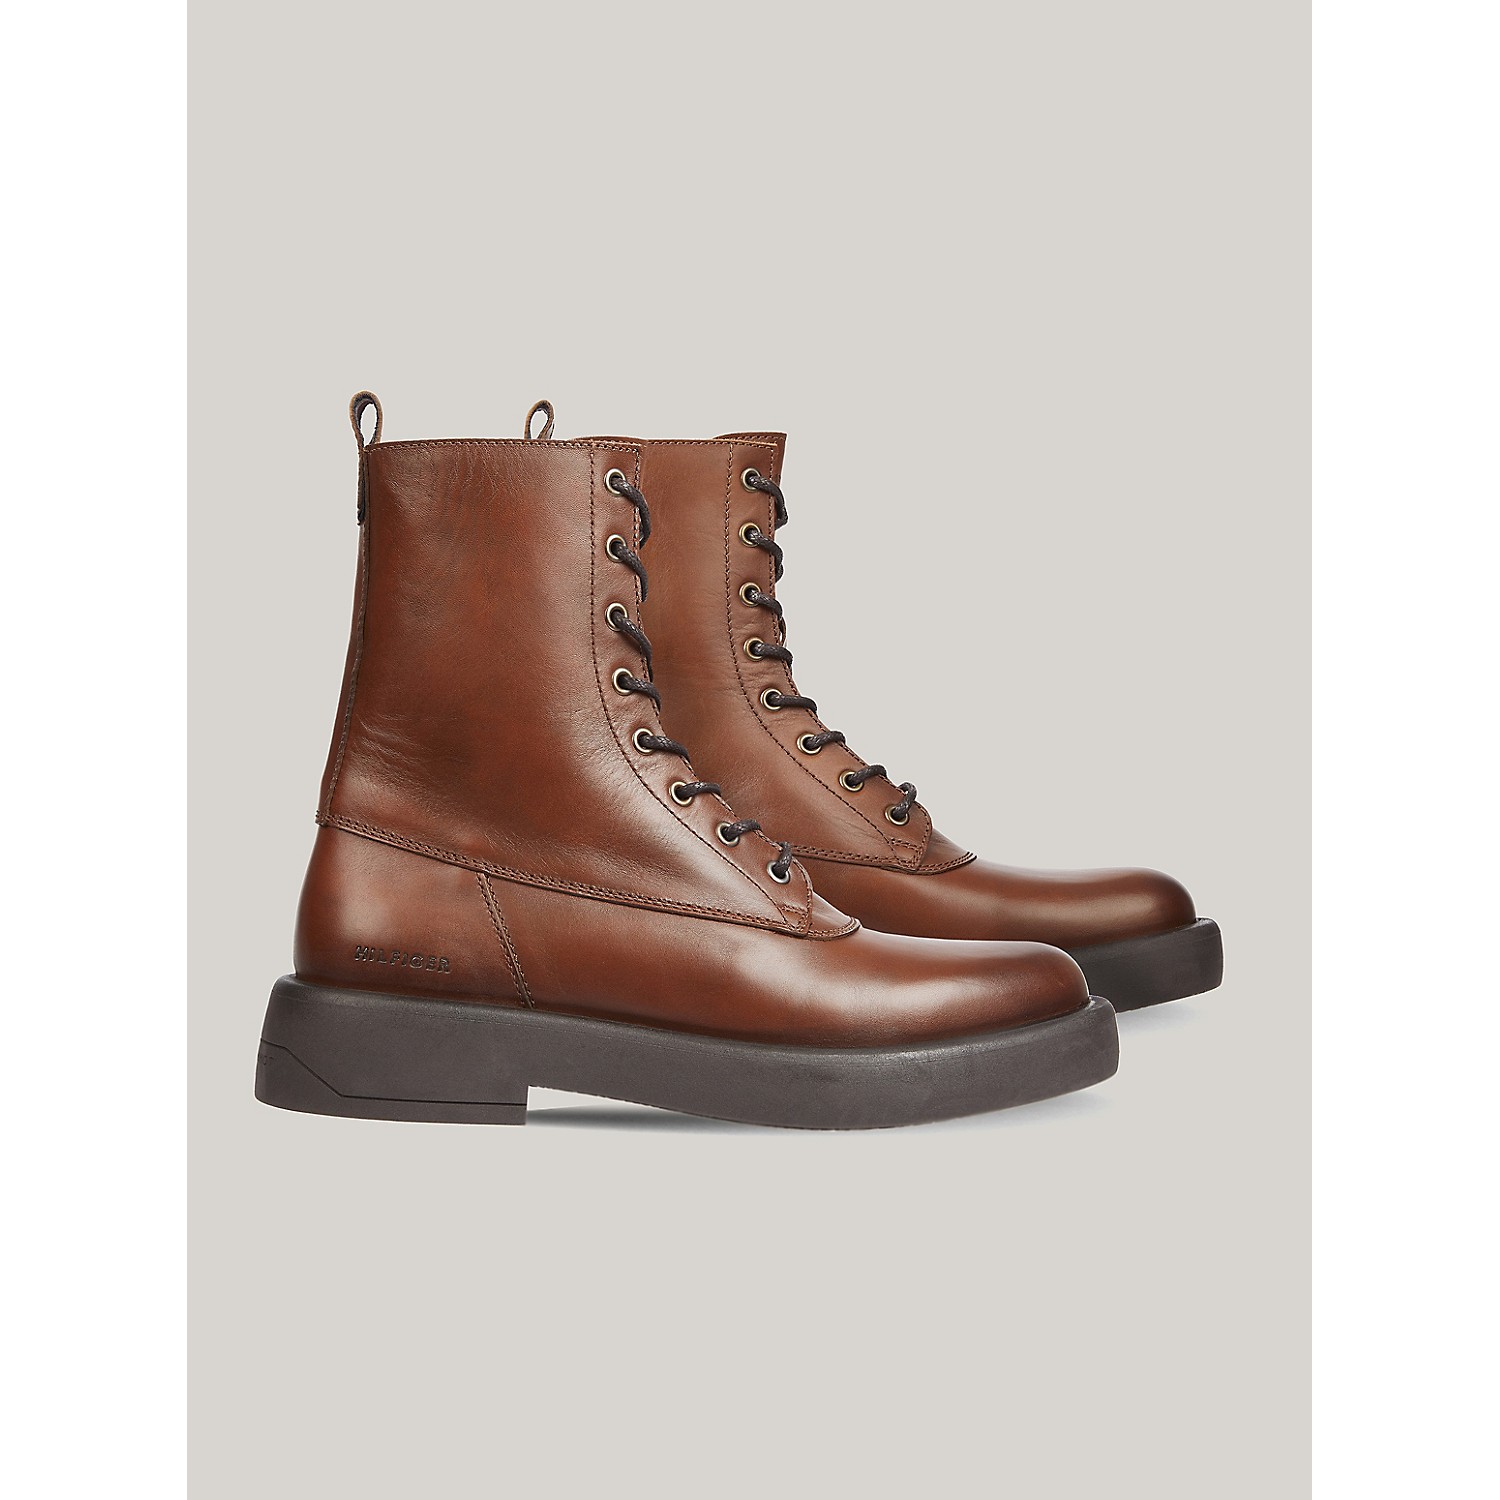 TOMMY HILFIGER Cognac Leather Boot